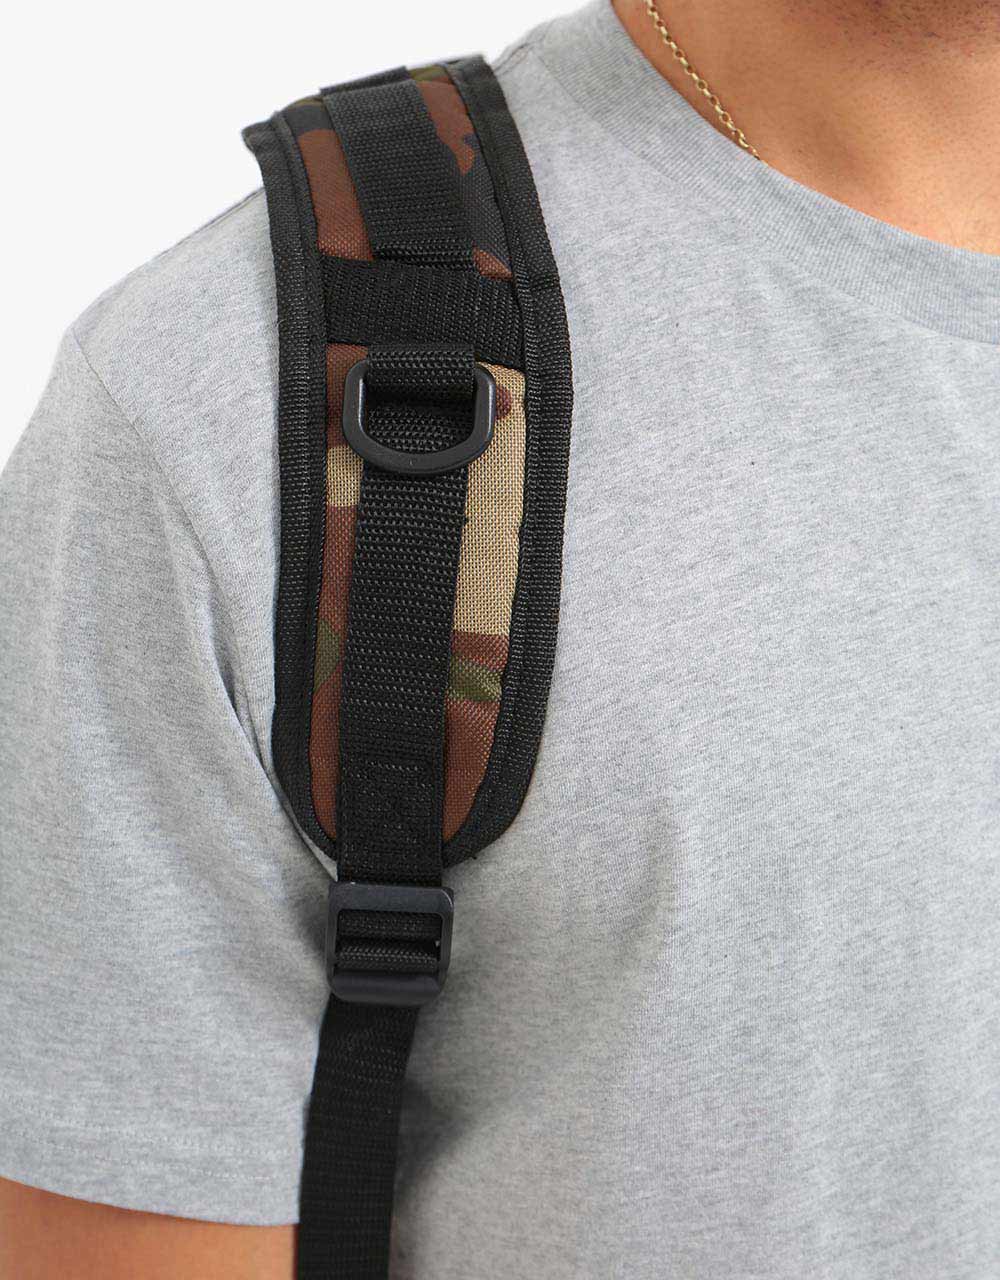 Route One Skatepack - Camo